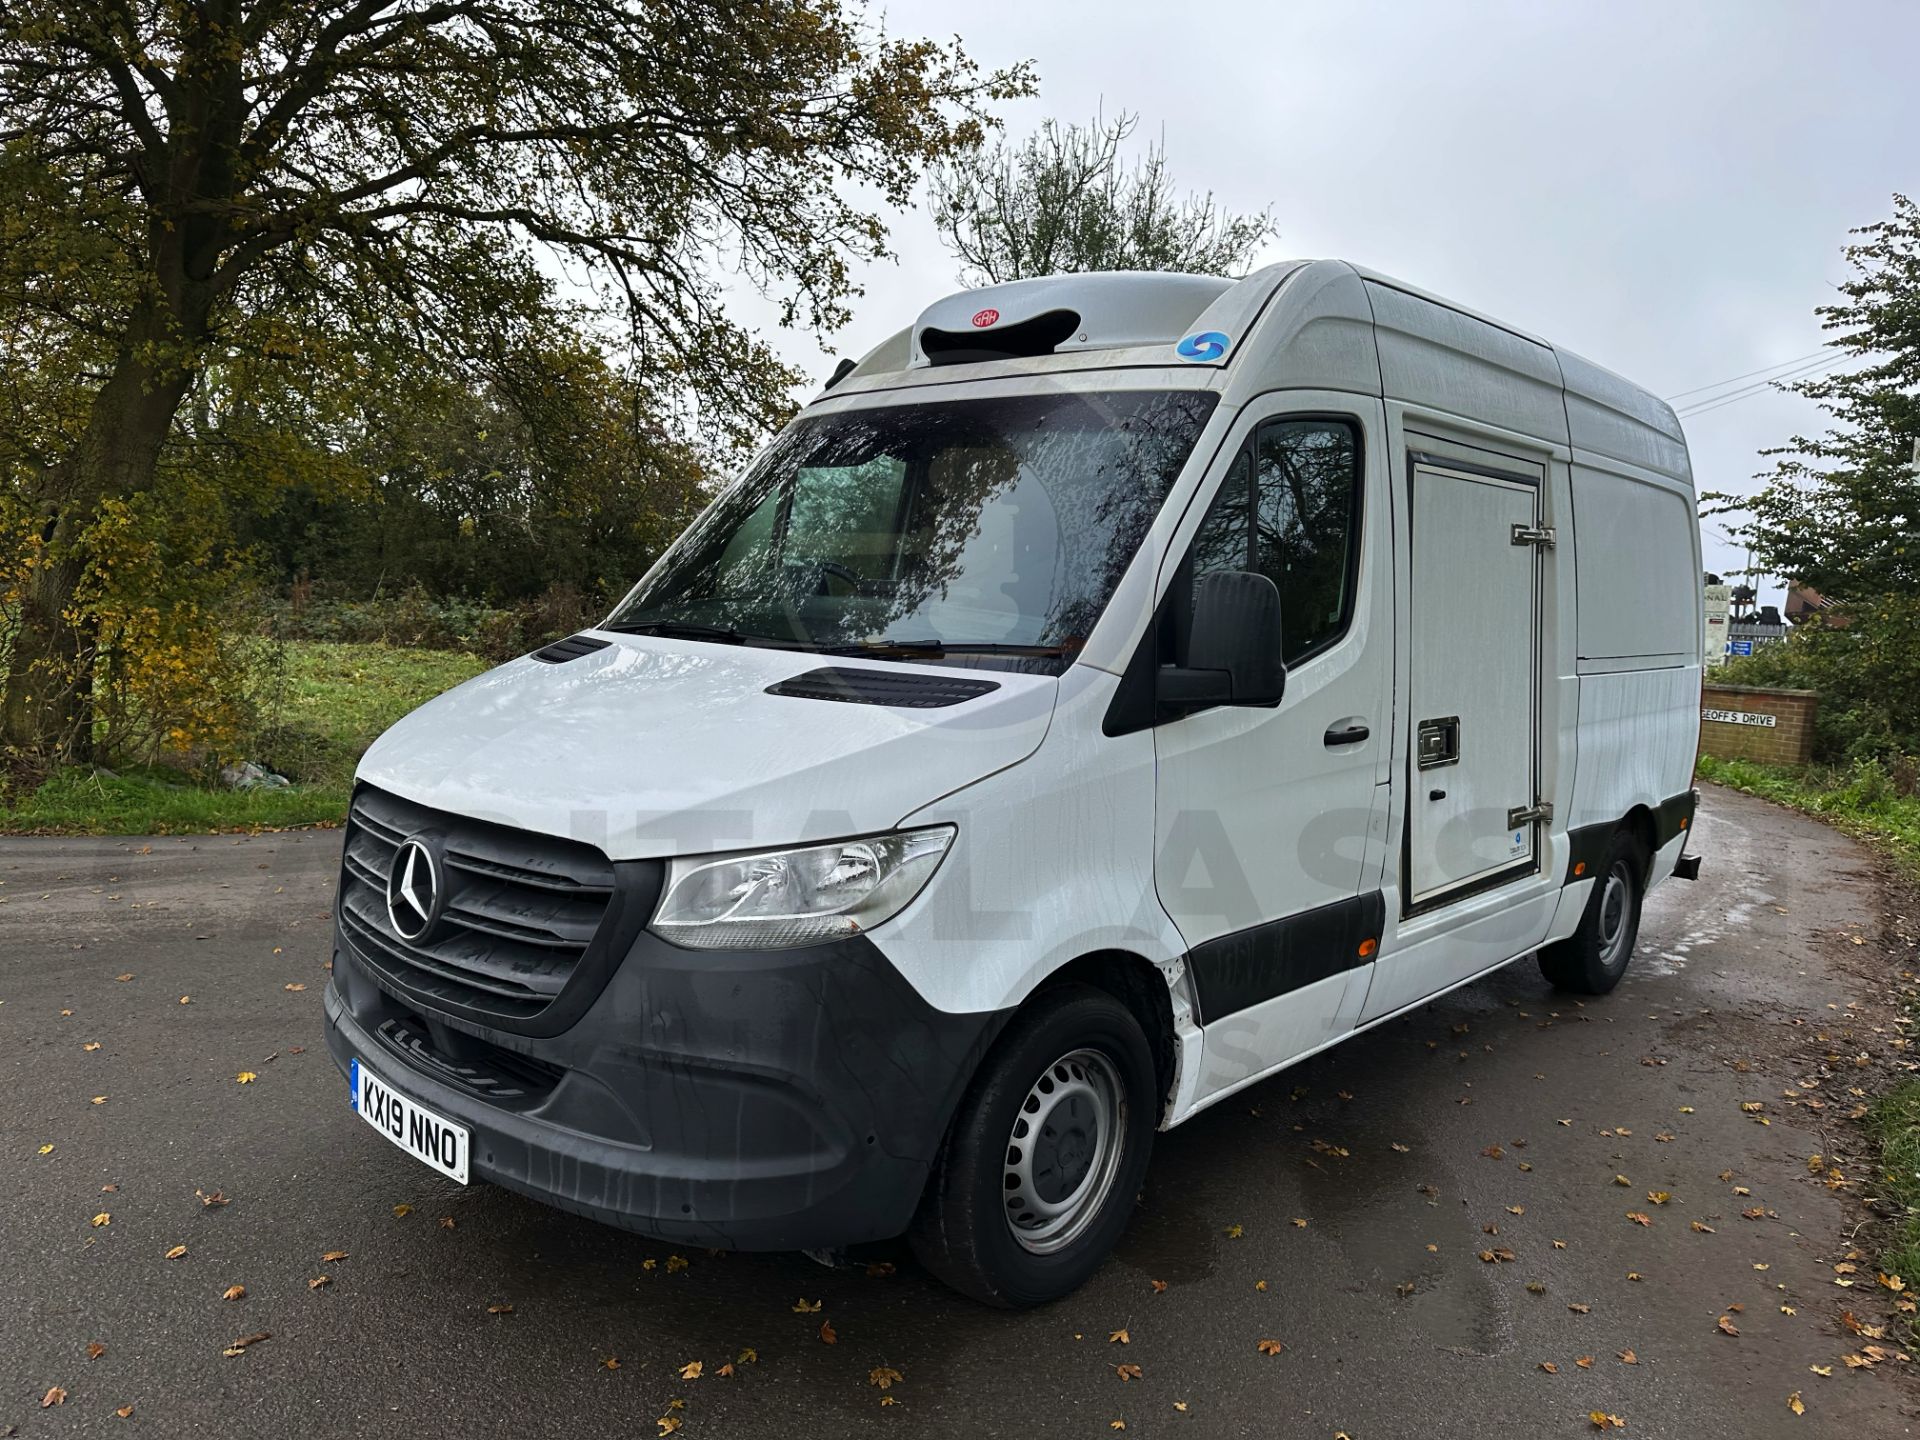 MERCEDES-BENZ SPRINTER 314 CDI *MWB - REFRIGERATED VAN* (2019 - FACELIFT MODEL) *OVERNIGHT STANDBY* - Image 5 of 45